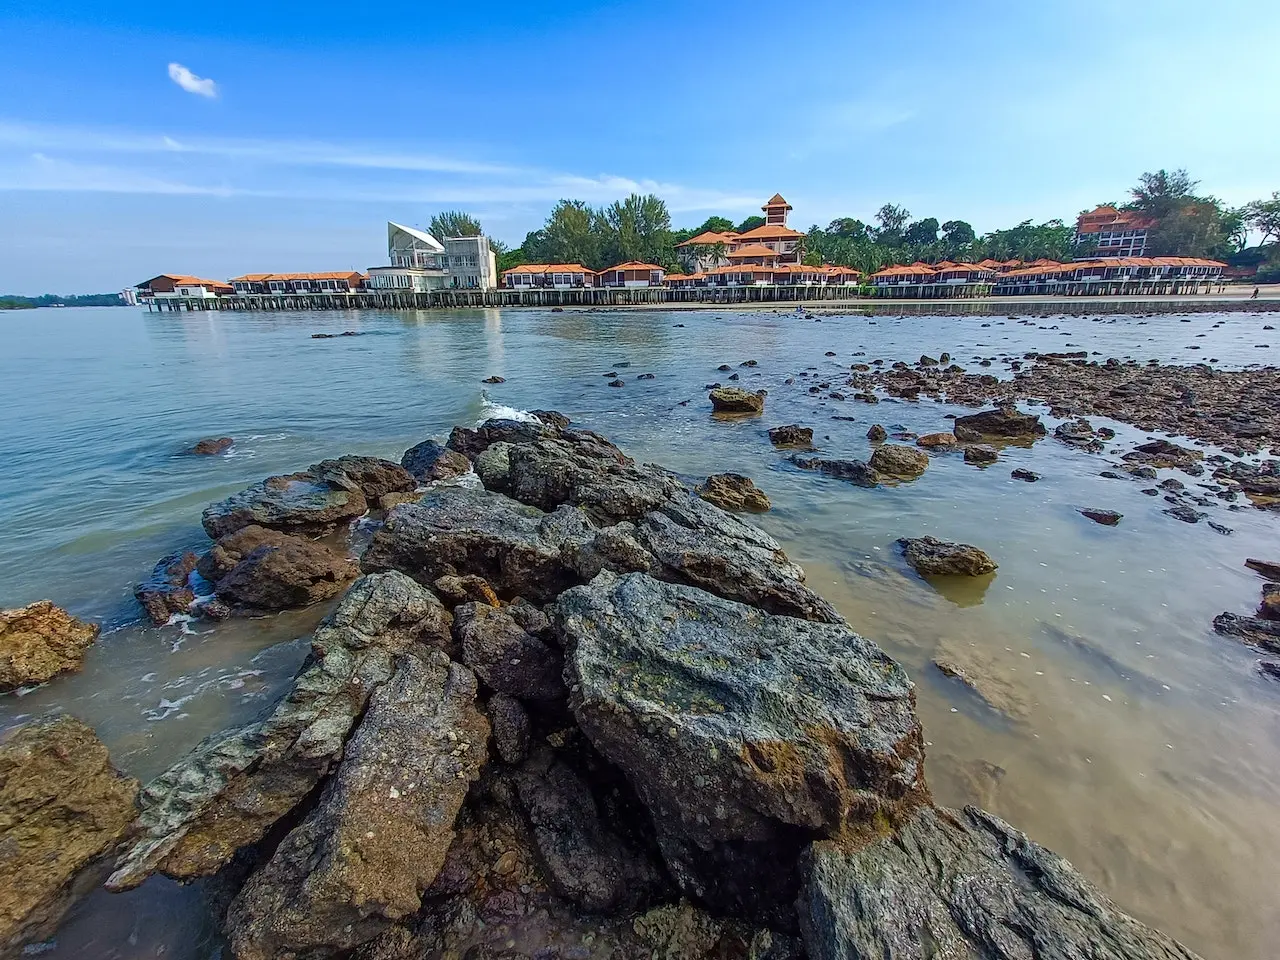 Port Dickson, a Malaysian Beach. Rocks in the forground jut out into an inlet, across which is a line of red-roofed houses.